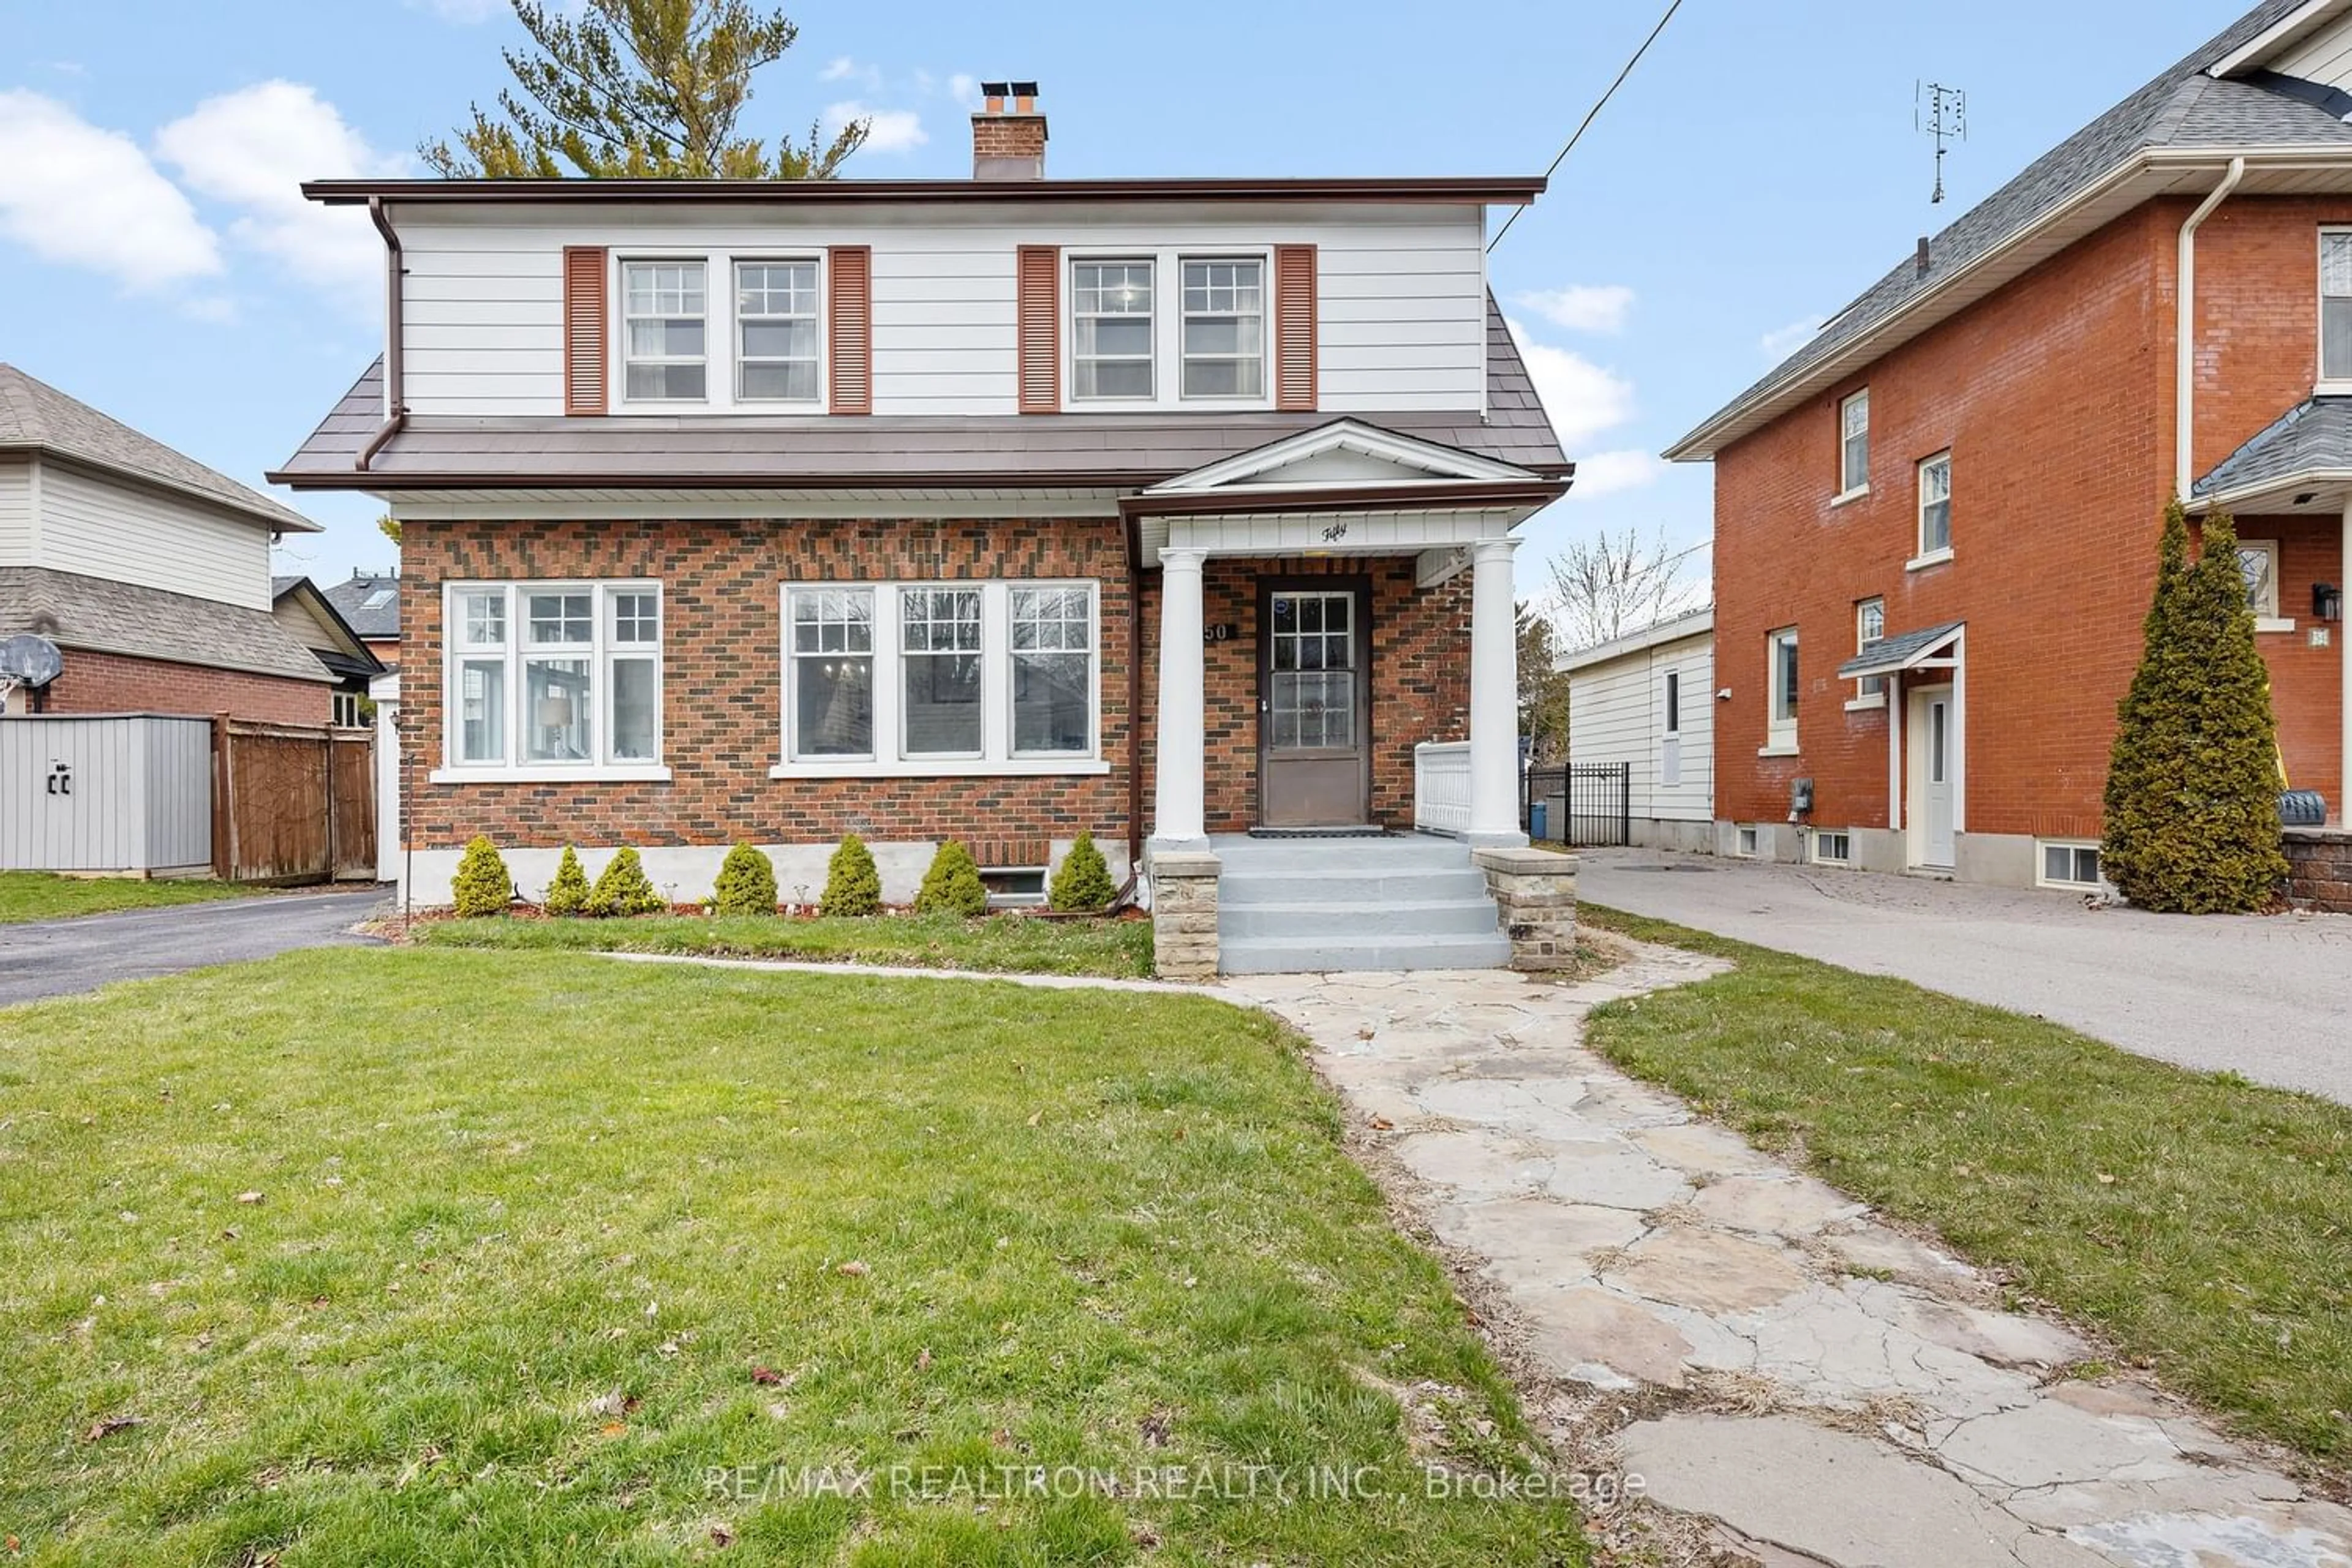 Home with brick exterior material for 50 Aberdeen St, Oshawa Ontario L1G 2E7